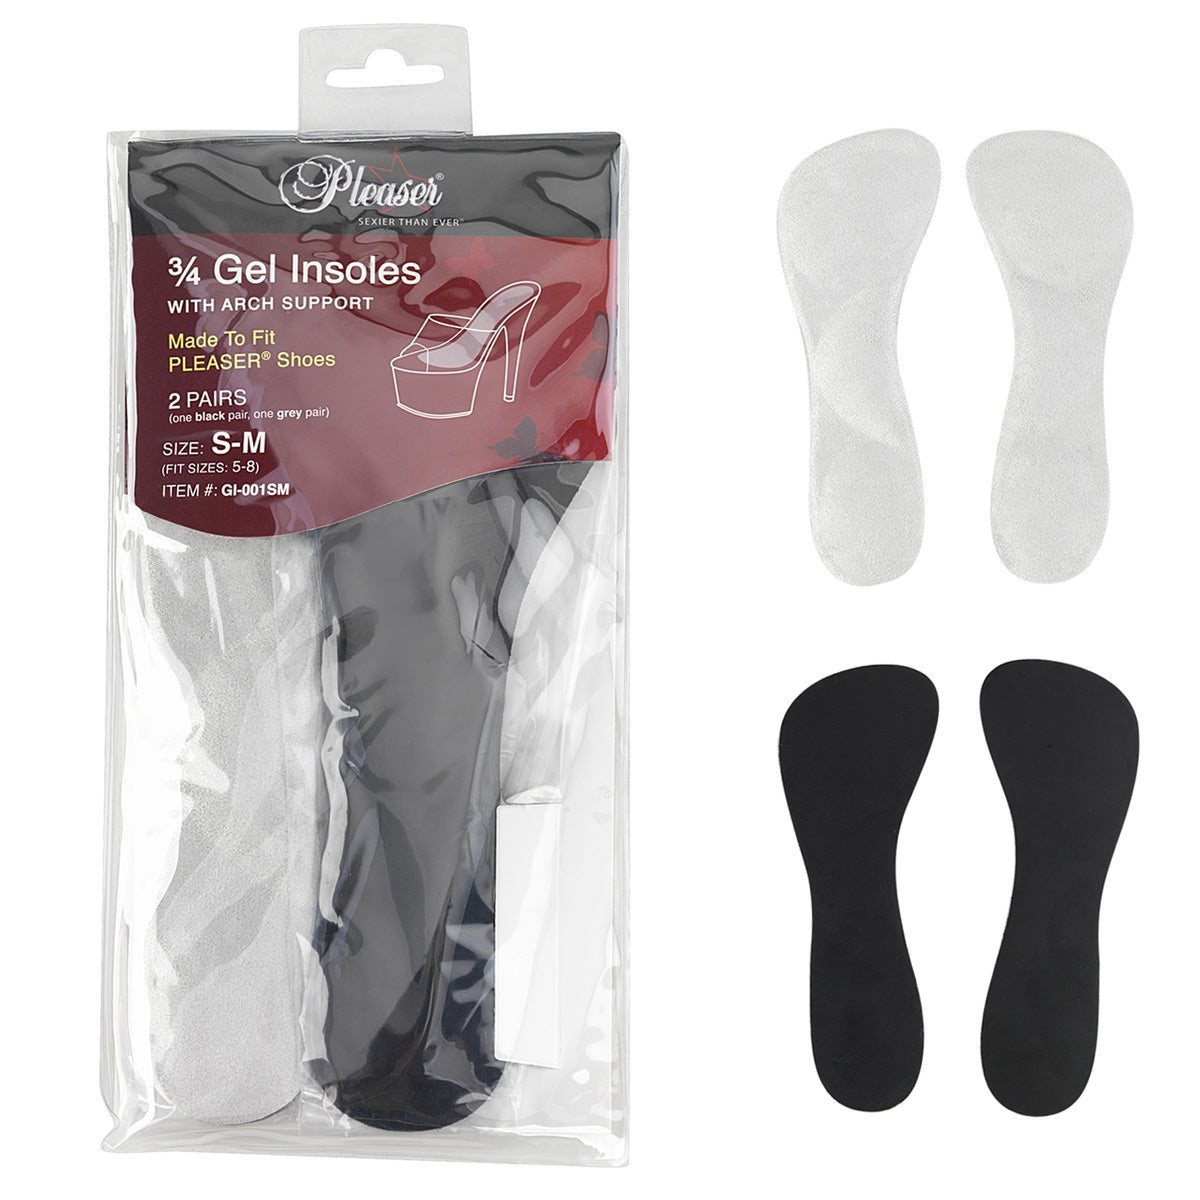 Gel Insoles with Arch Support